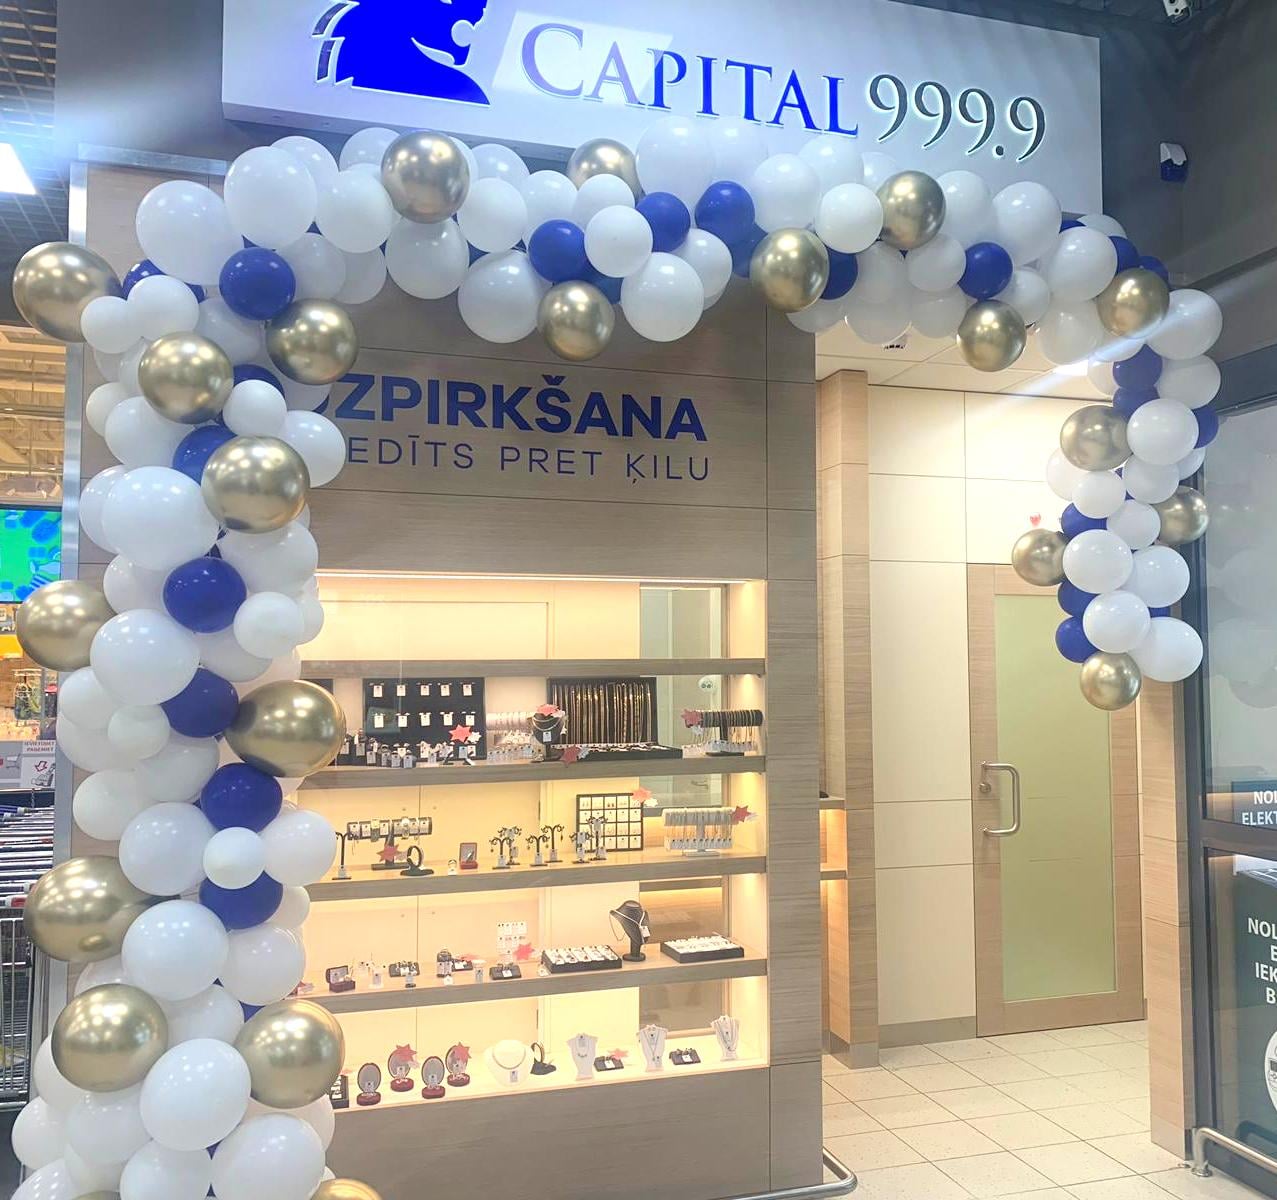 Capital 999.9 - New pawnshop network in Latvia